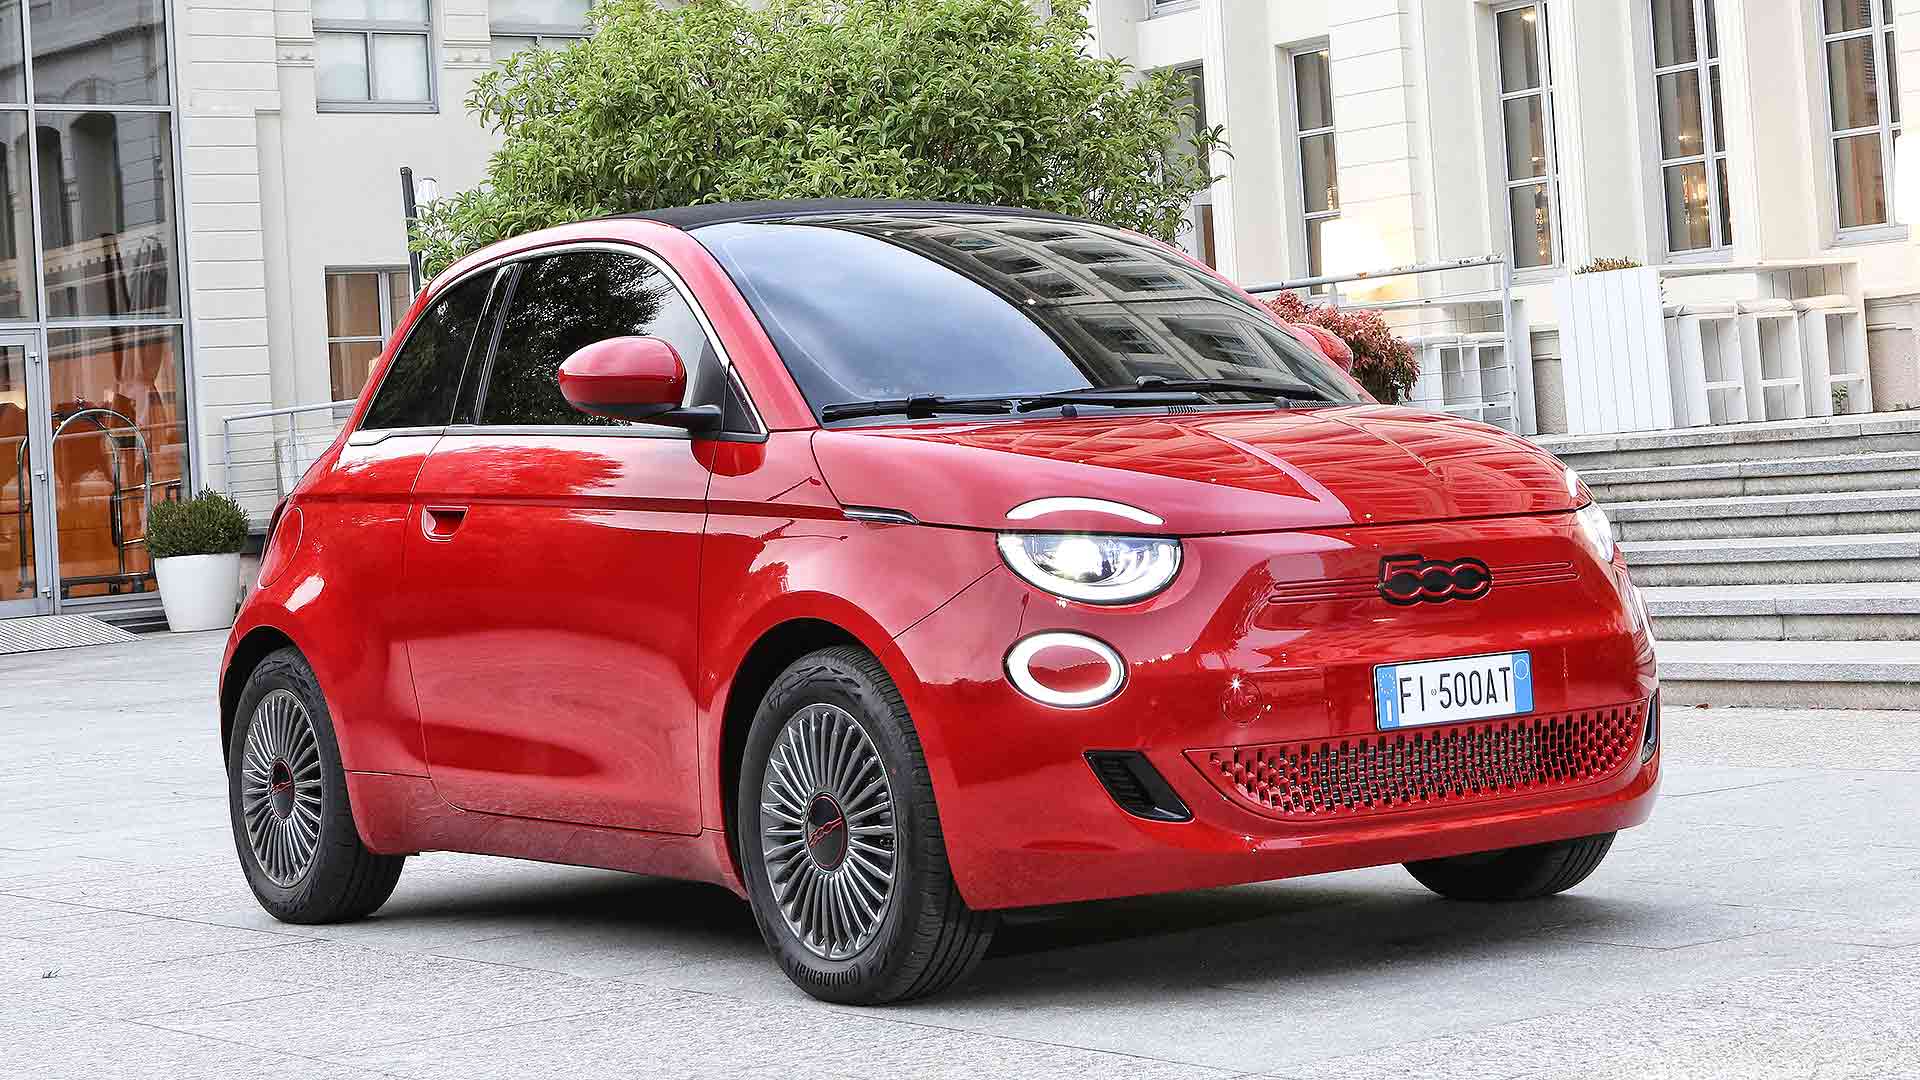 bono-reveals-electric-fiat-500-red-special-edition-motoring-electric